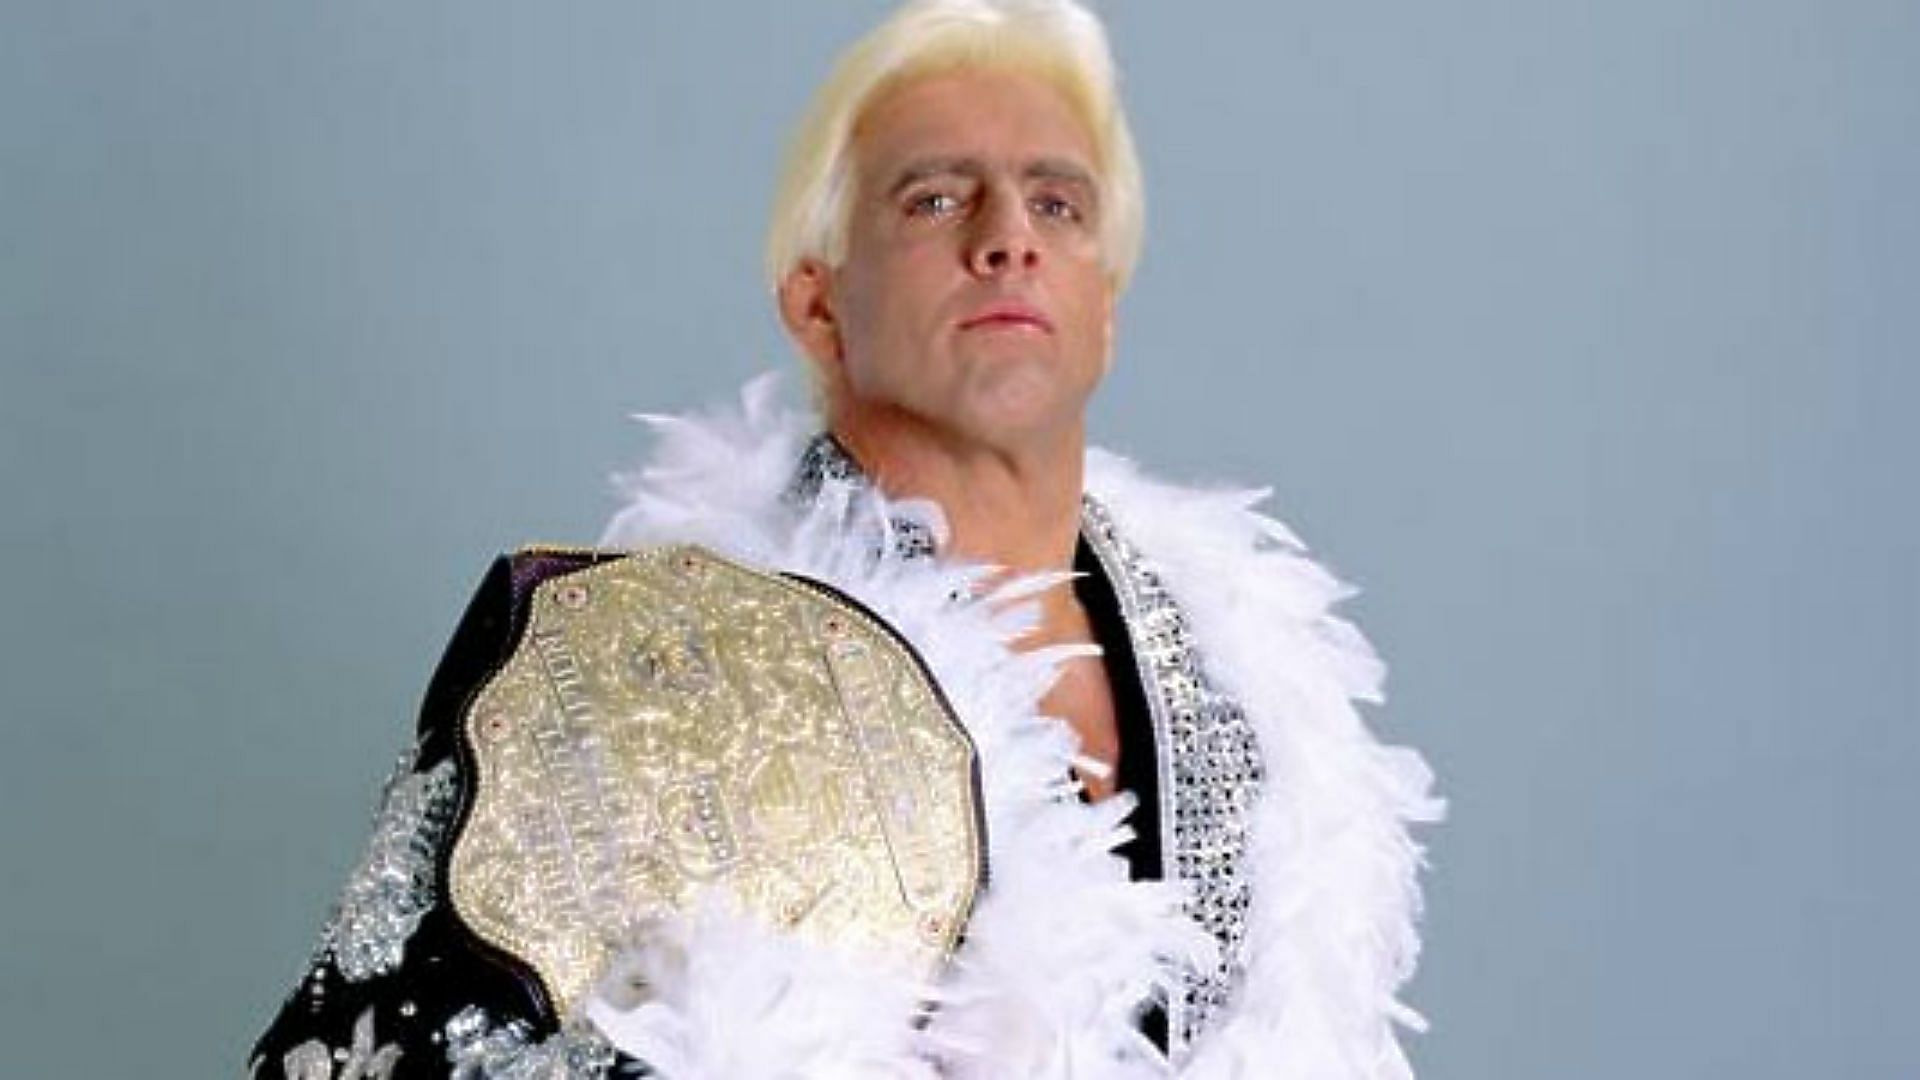 Will Ric Flair be able to Wooo the fans once again?